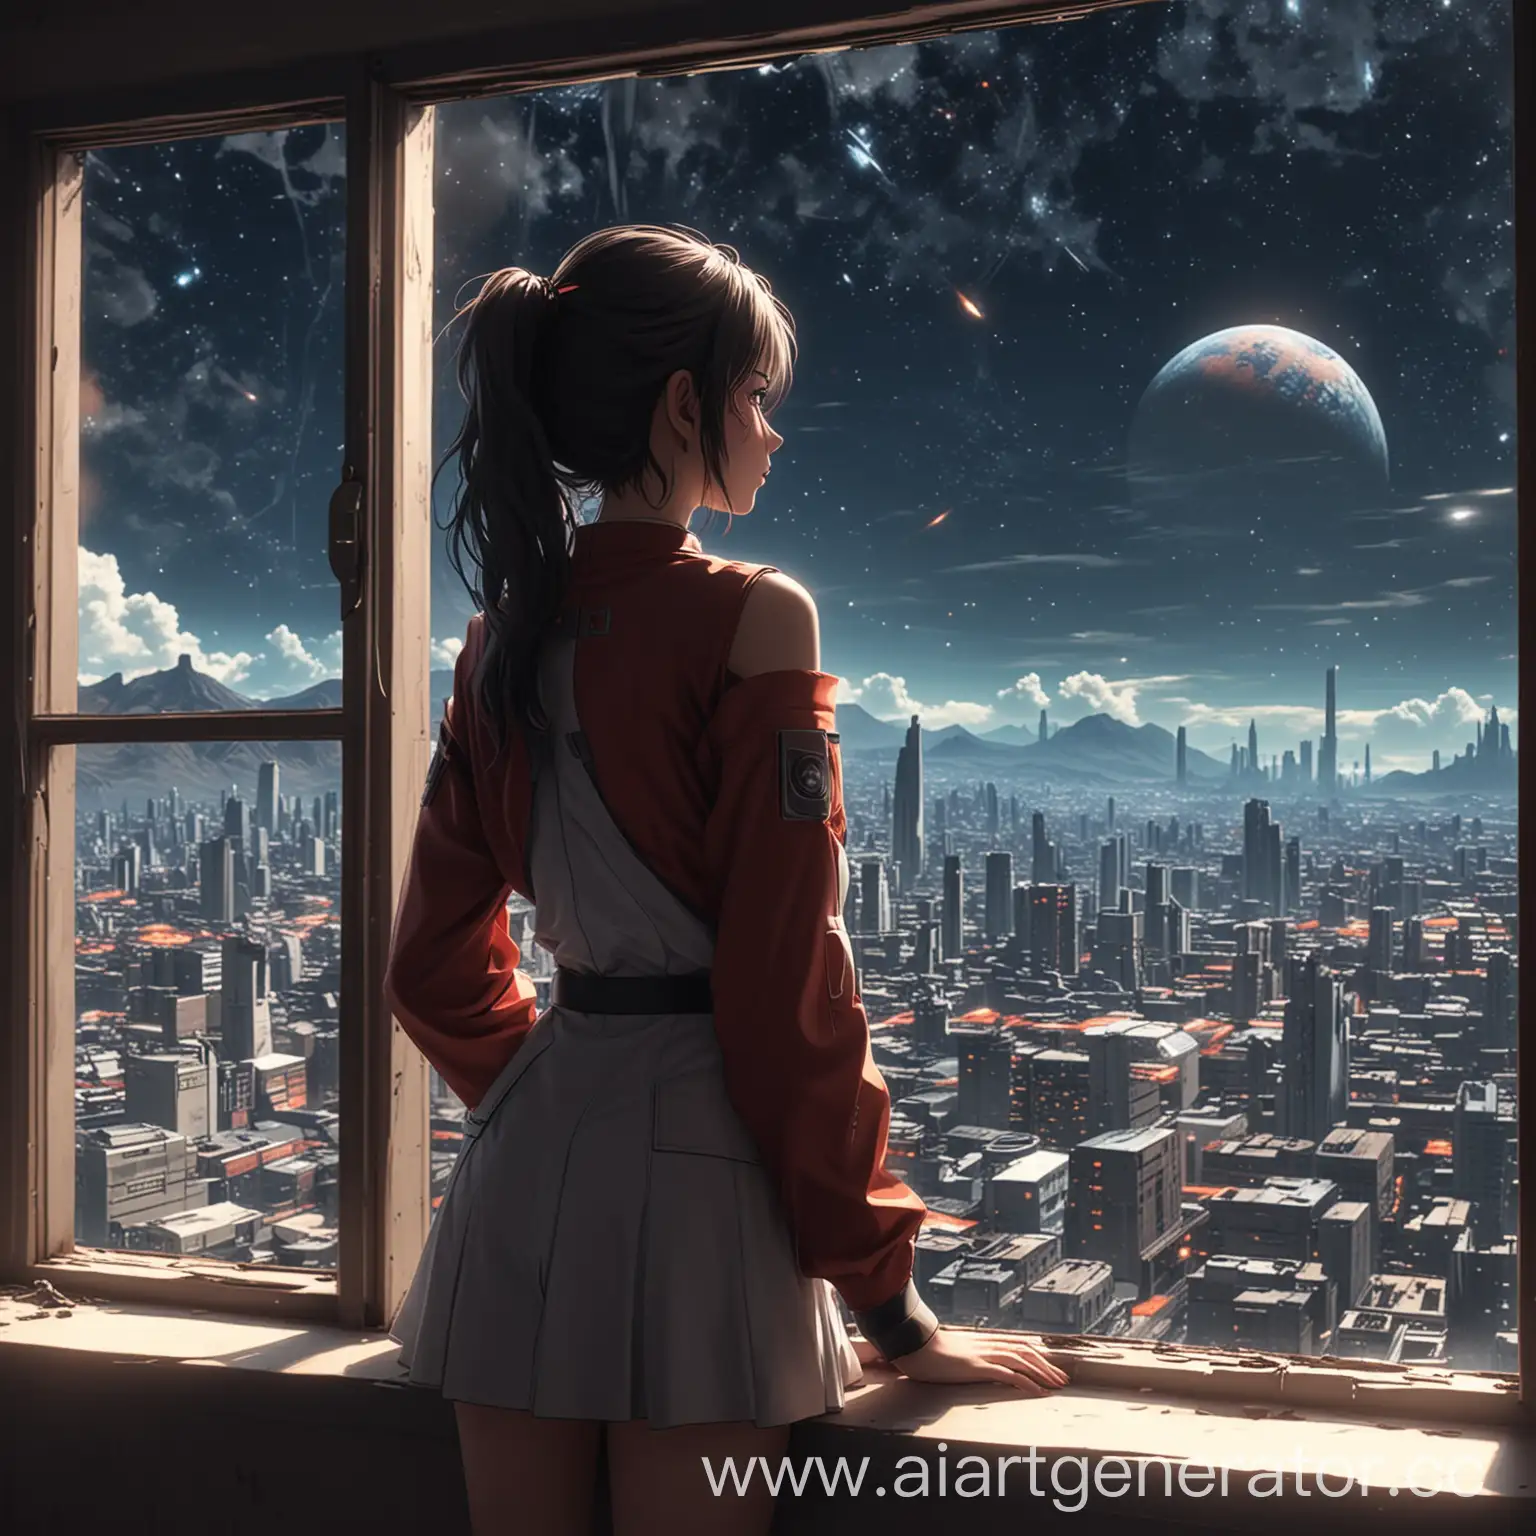 An anime girl who is waiting for her lover on another planet by the window. A fantastic city of the future is spread out outside the window. without blurring the background from the back. the view from the window is clean, without blurring in 4k format